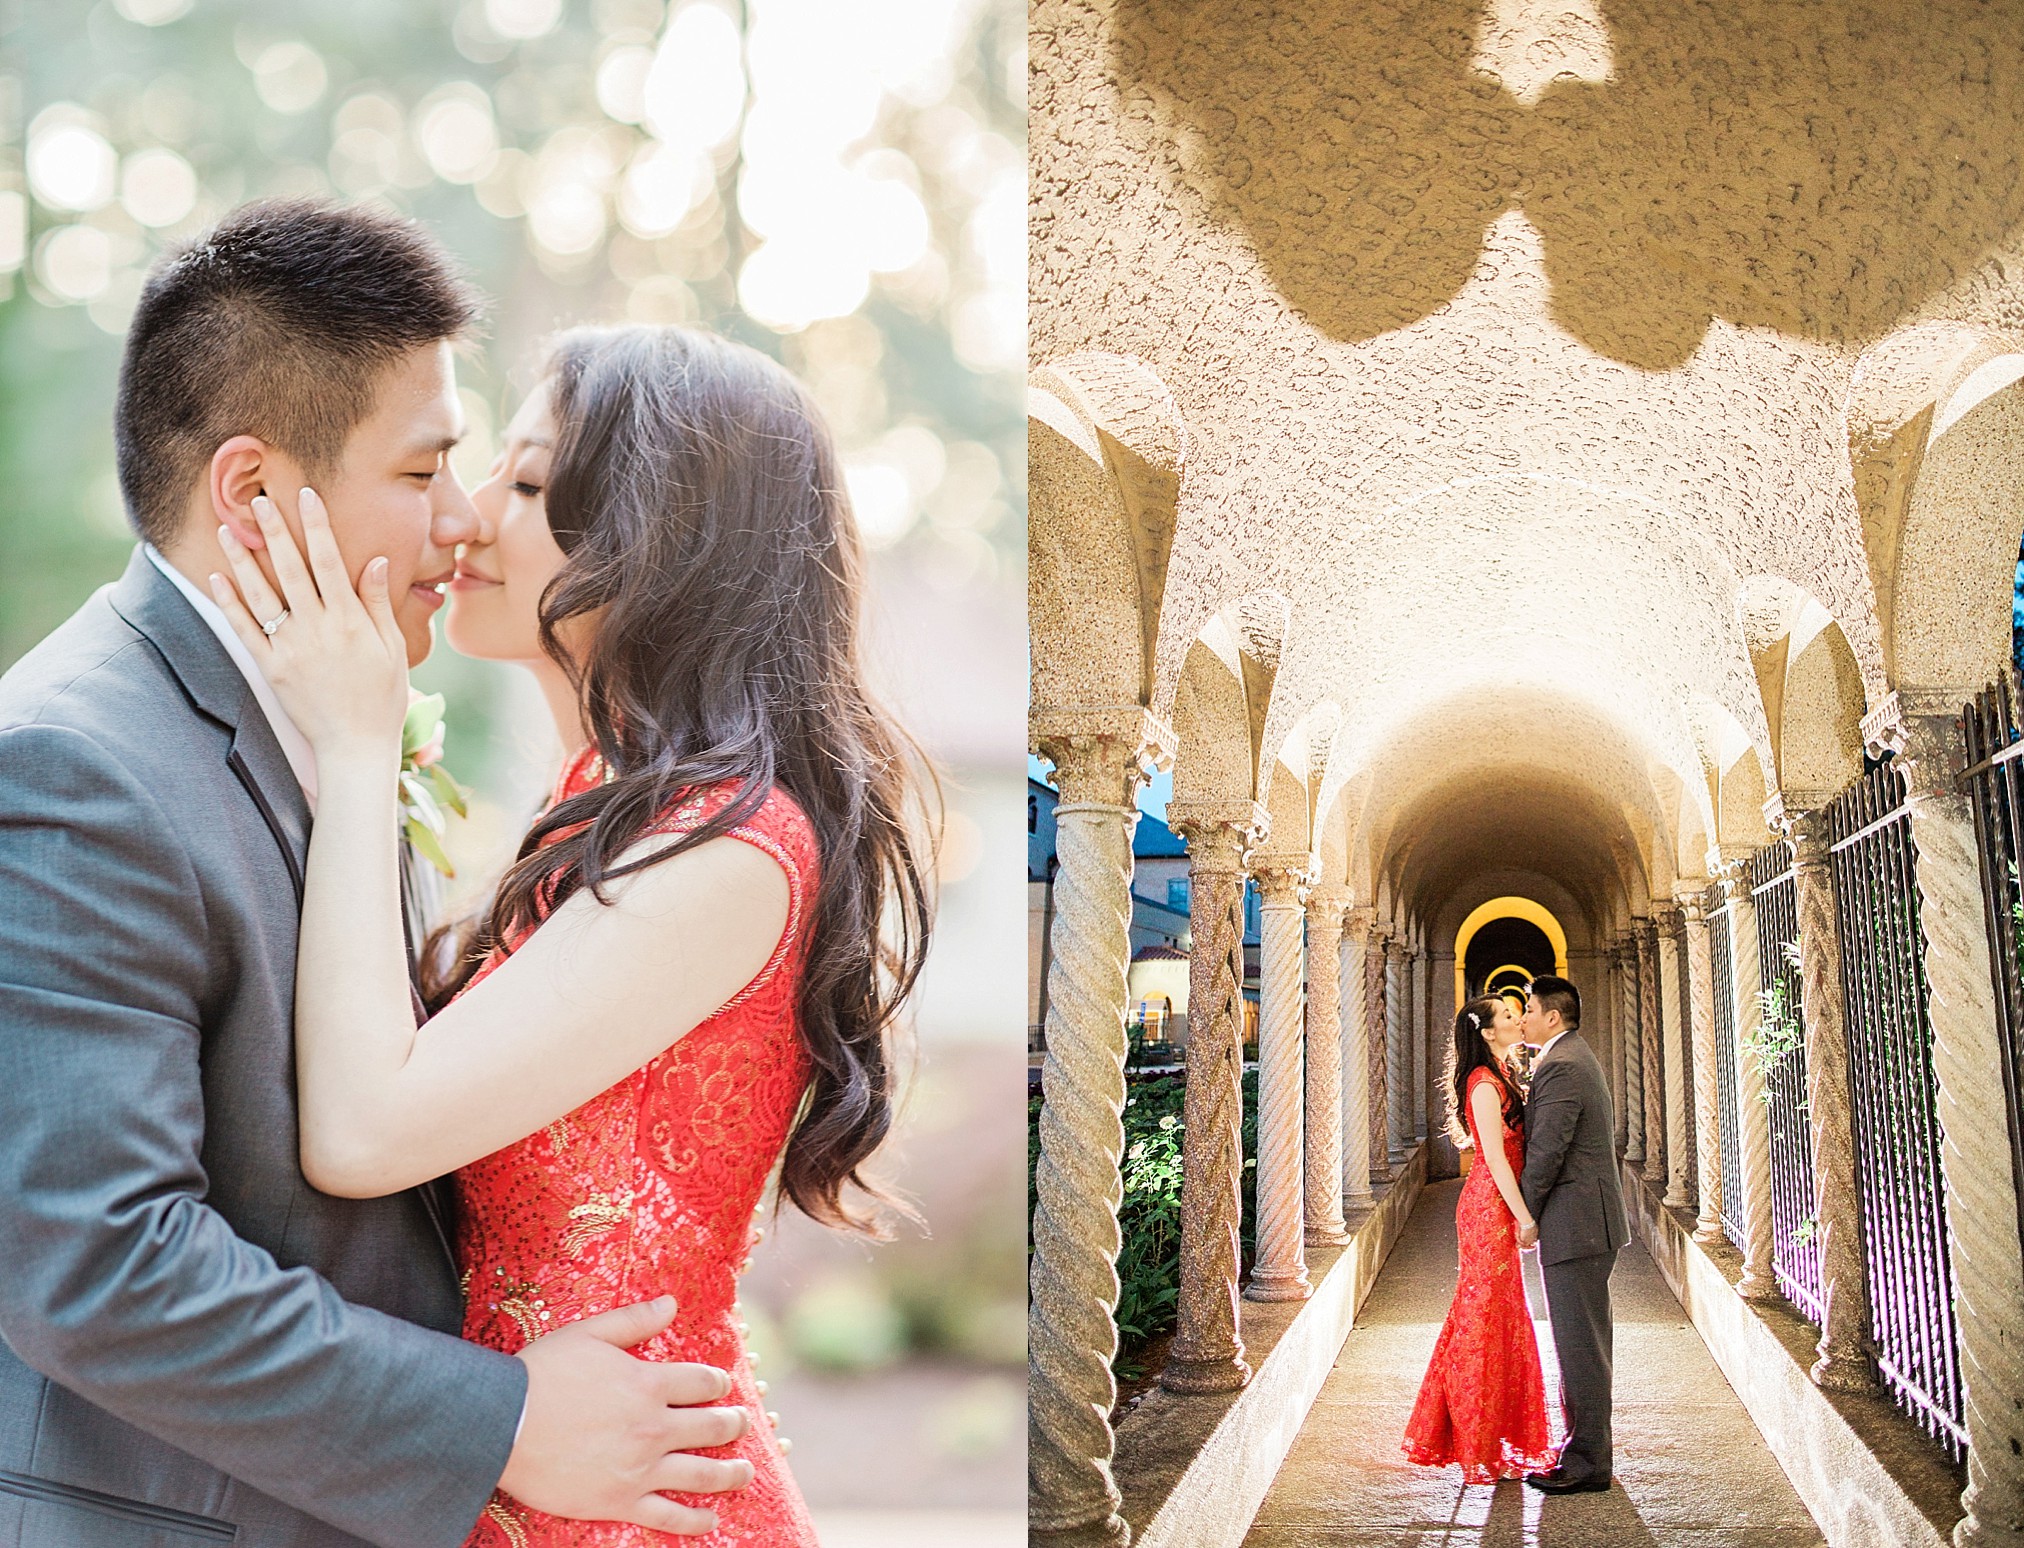 View More: http://dyannajoyphotography.pass.us/jamie-and-andrew-wedding